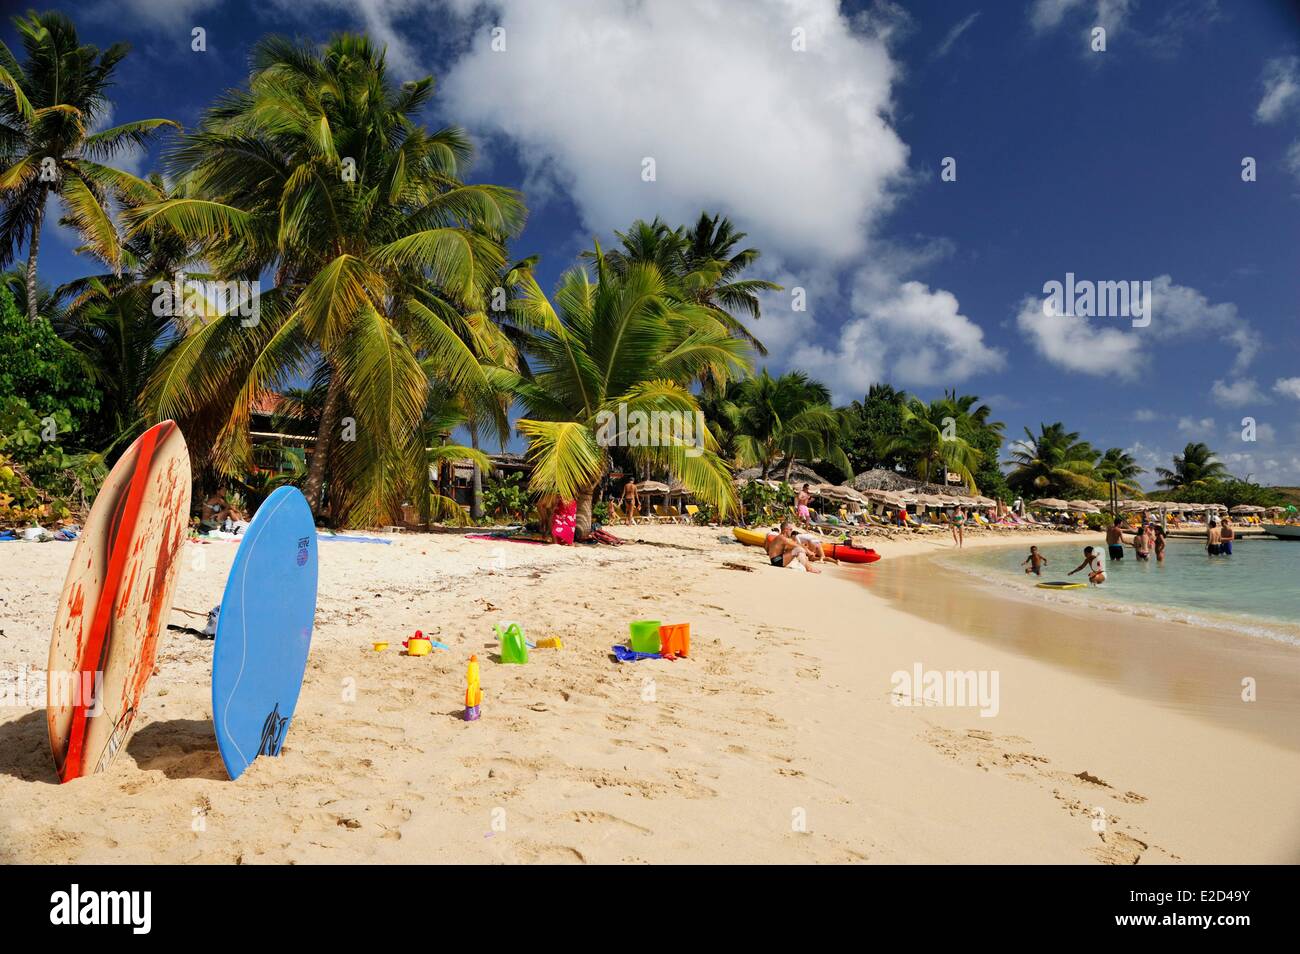 France Guadeloupe Saint Martin Cul de Sac Pinel Island two surfboards planted in the sand next to children's toys Stock Photo